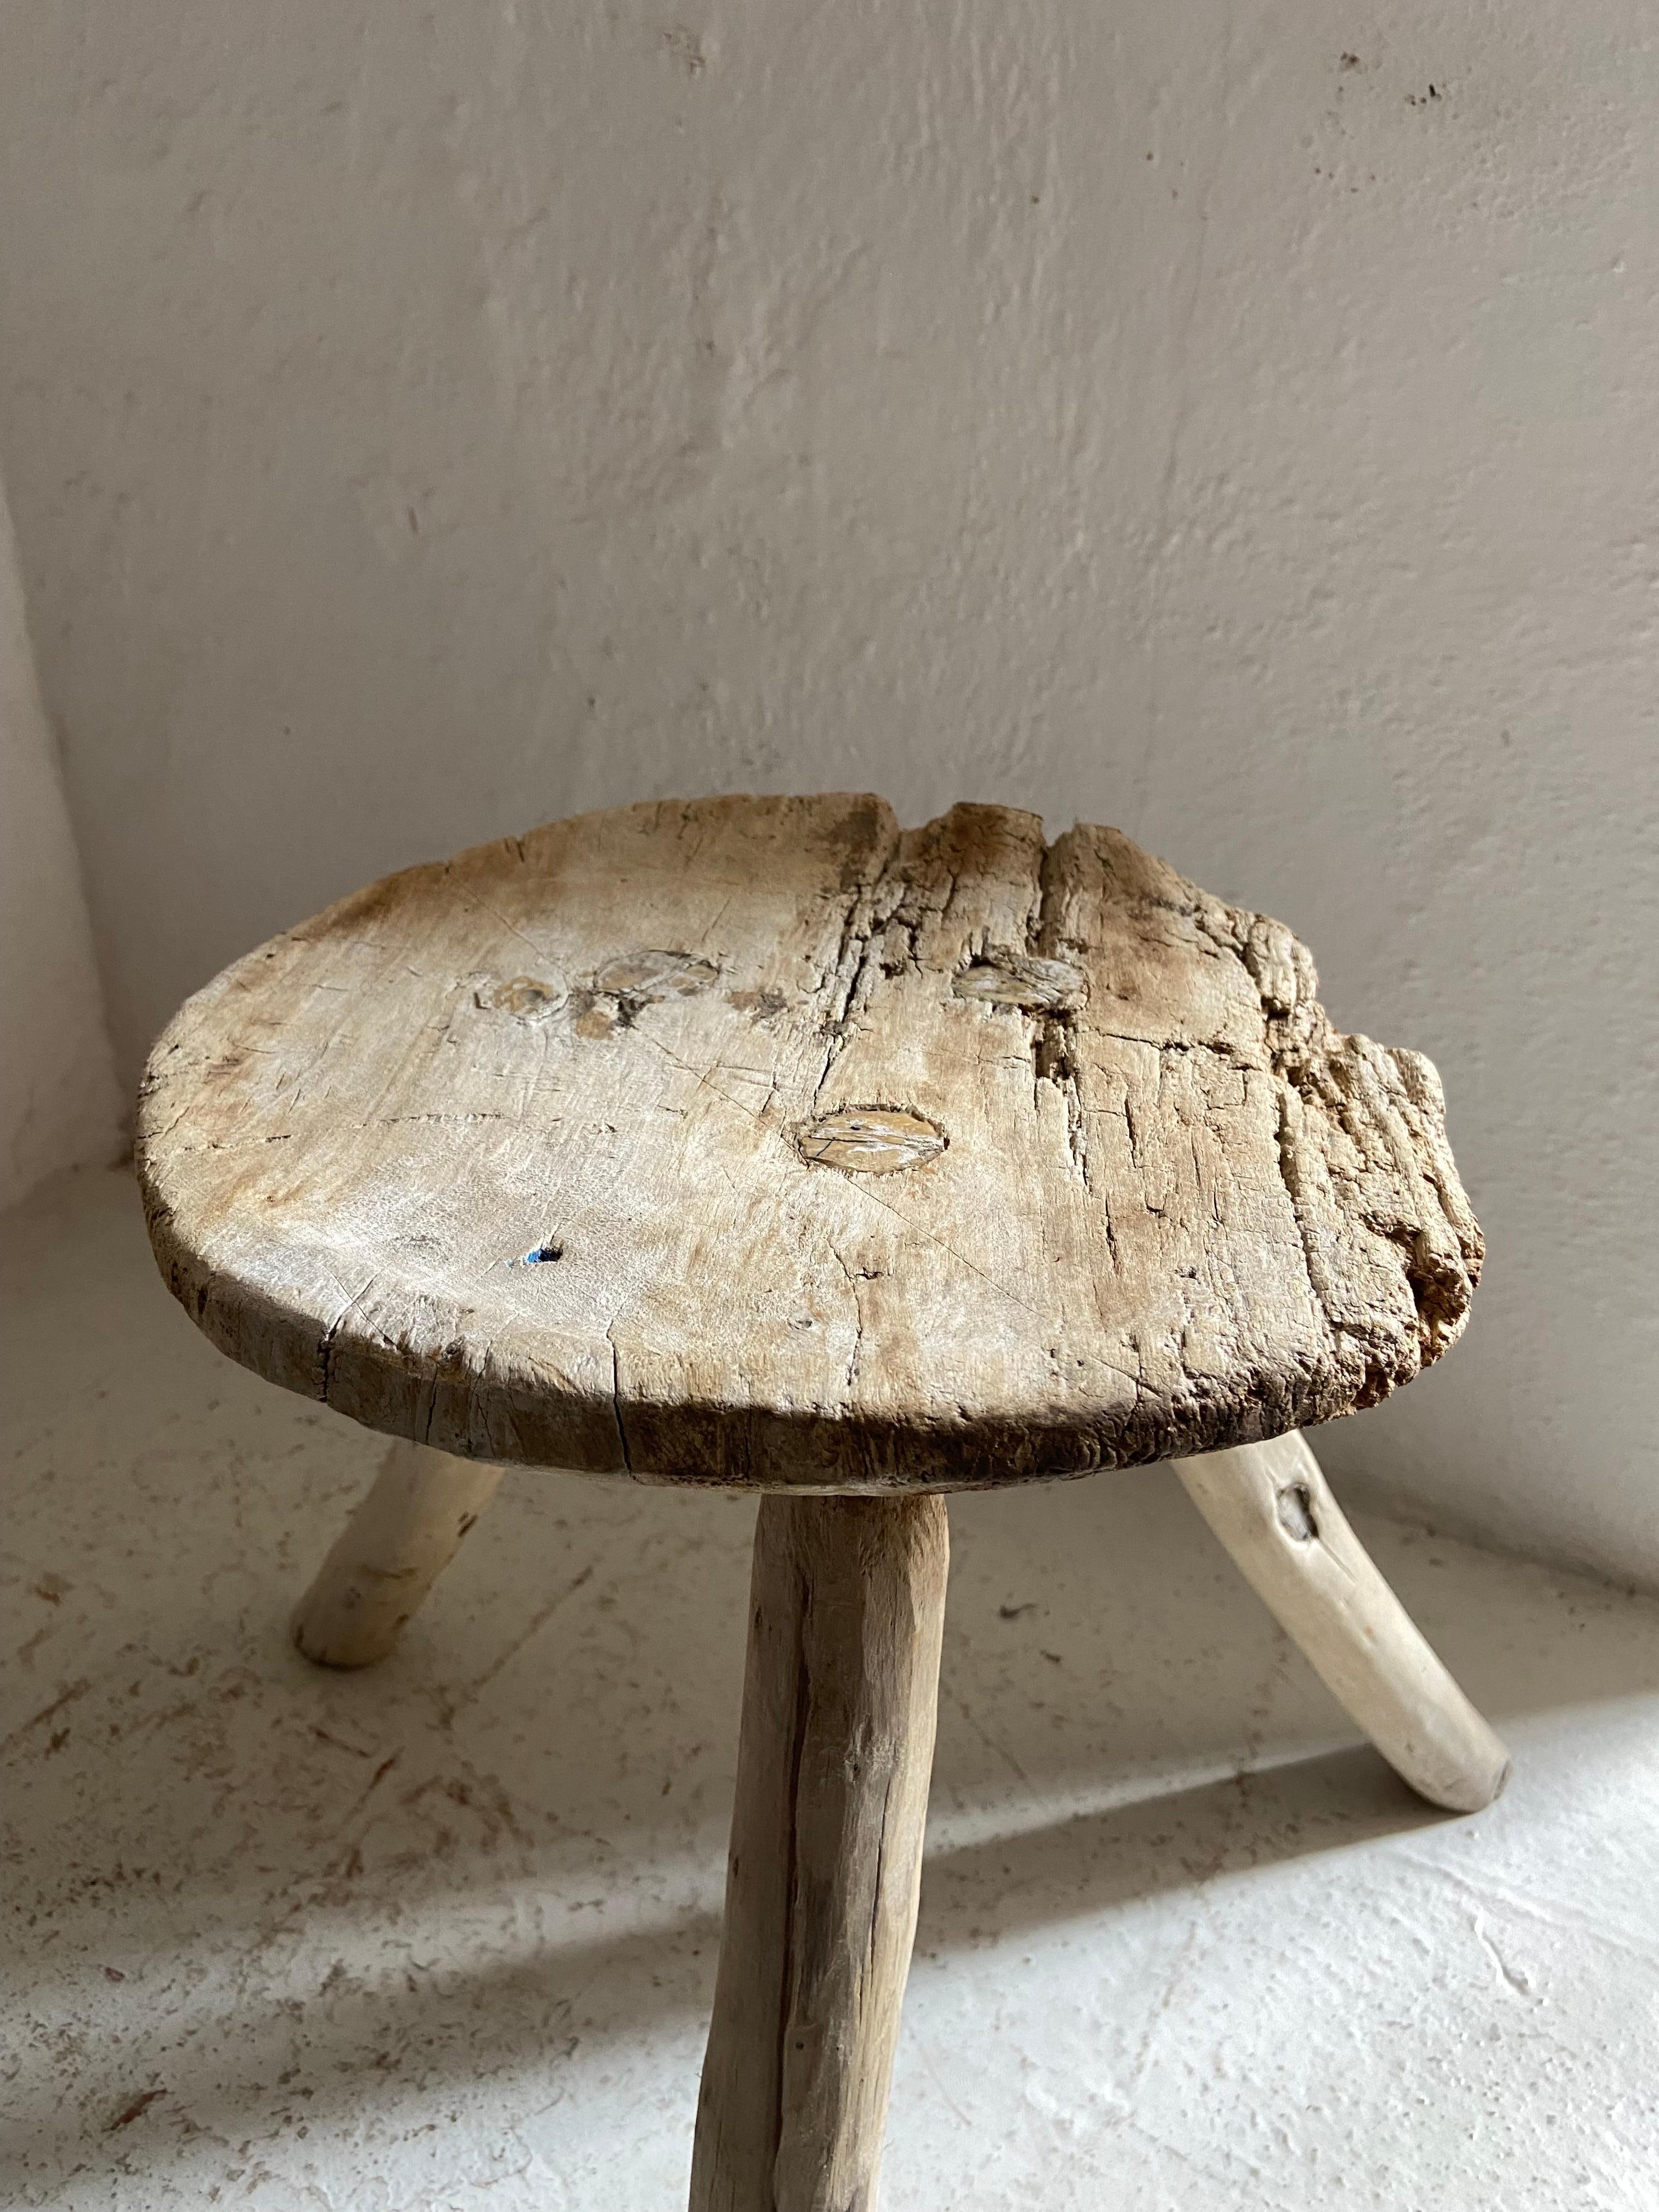 Primitive Mid-20th Century Stool from Mexico